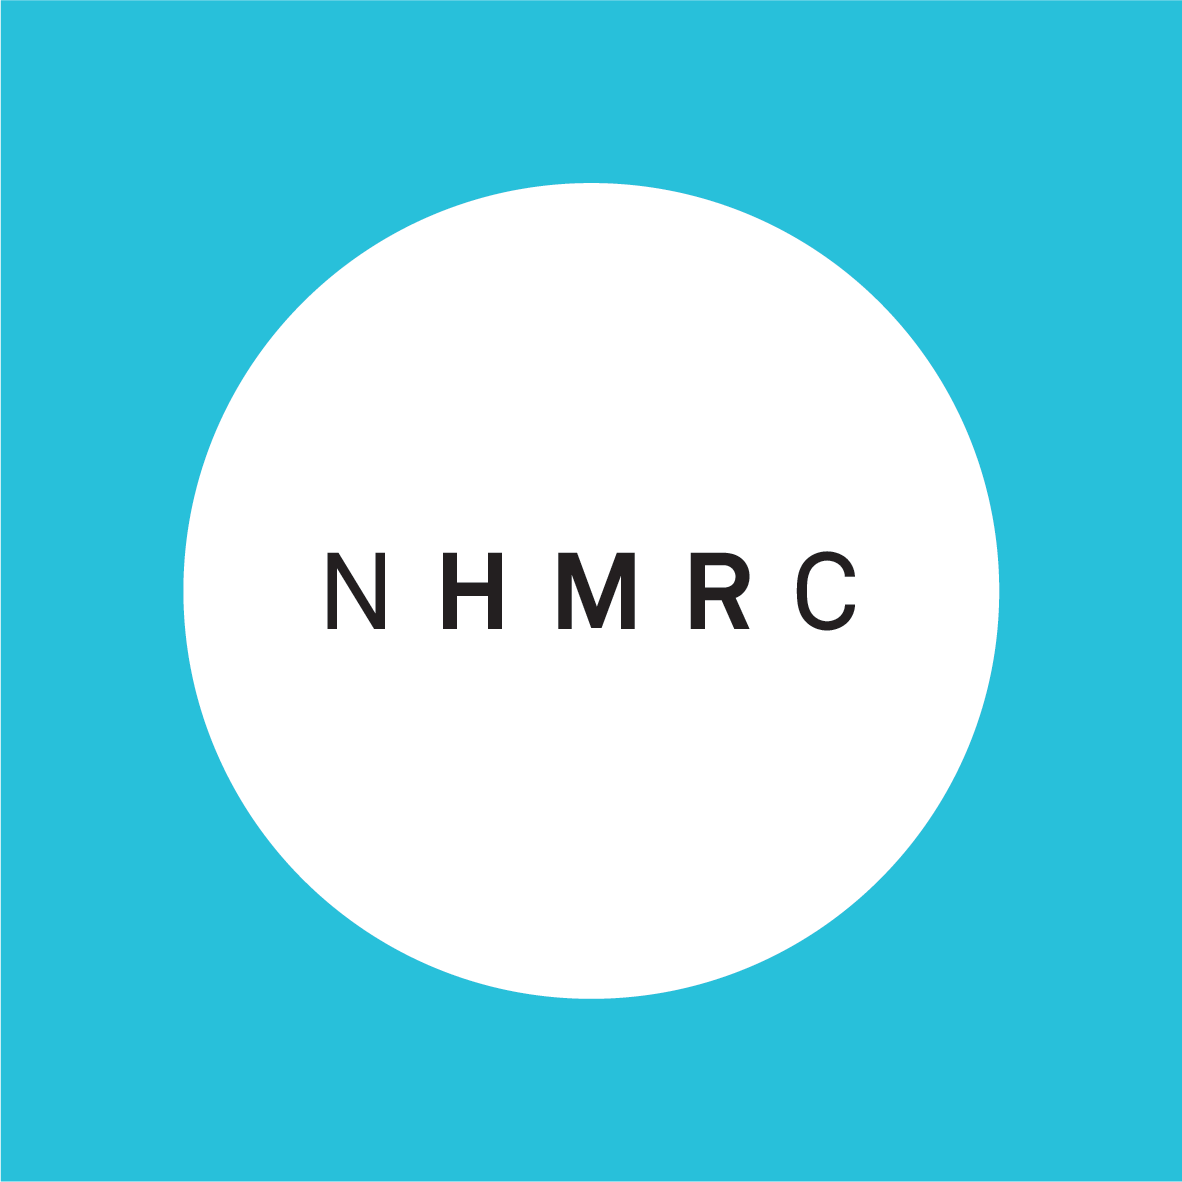 The National Health and Medical Research Council (NHMRC) logo